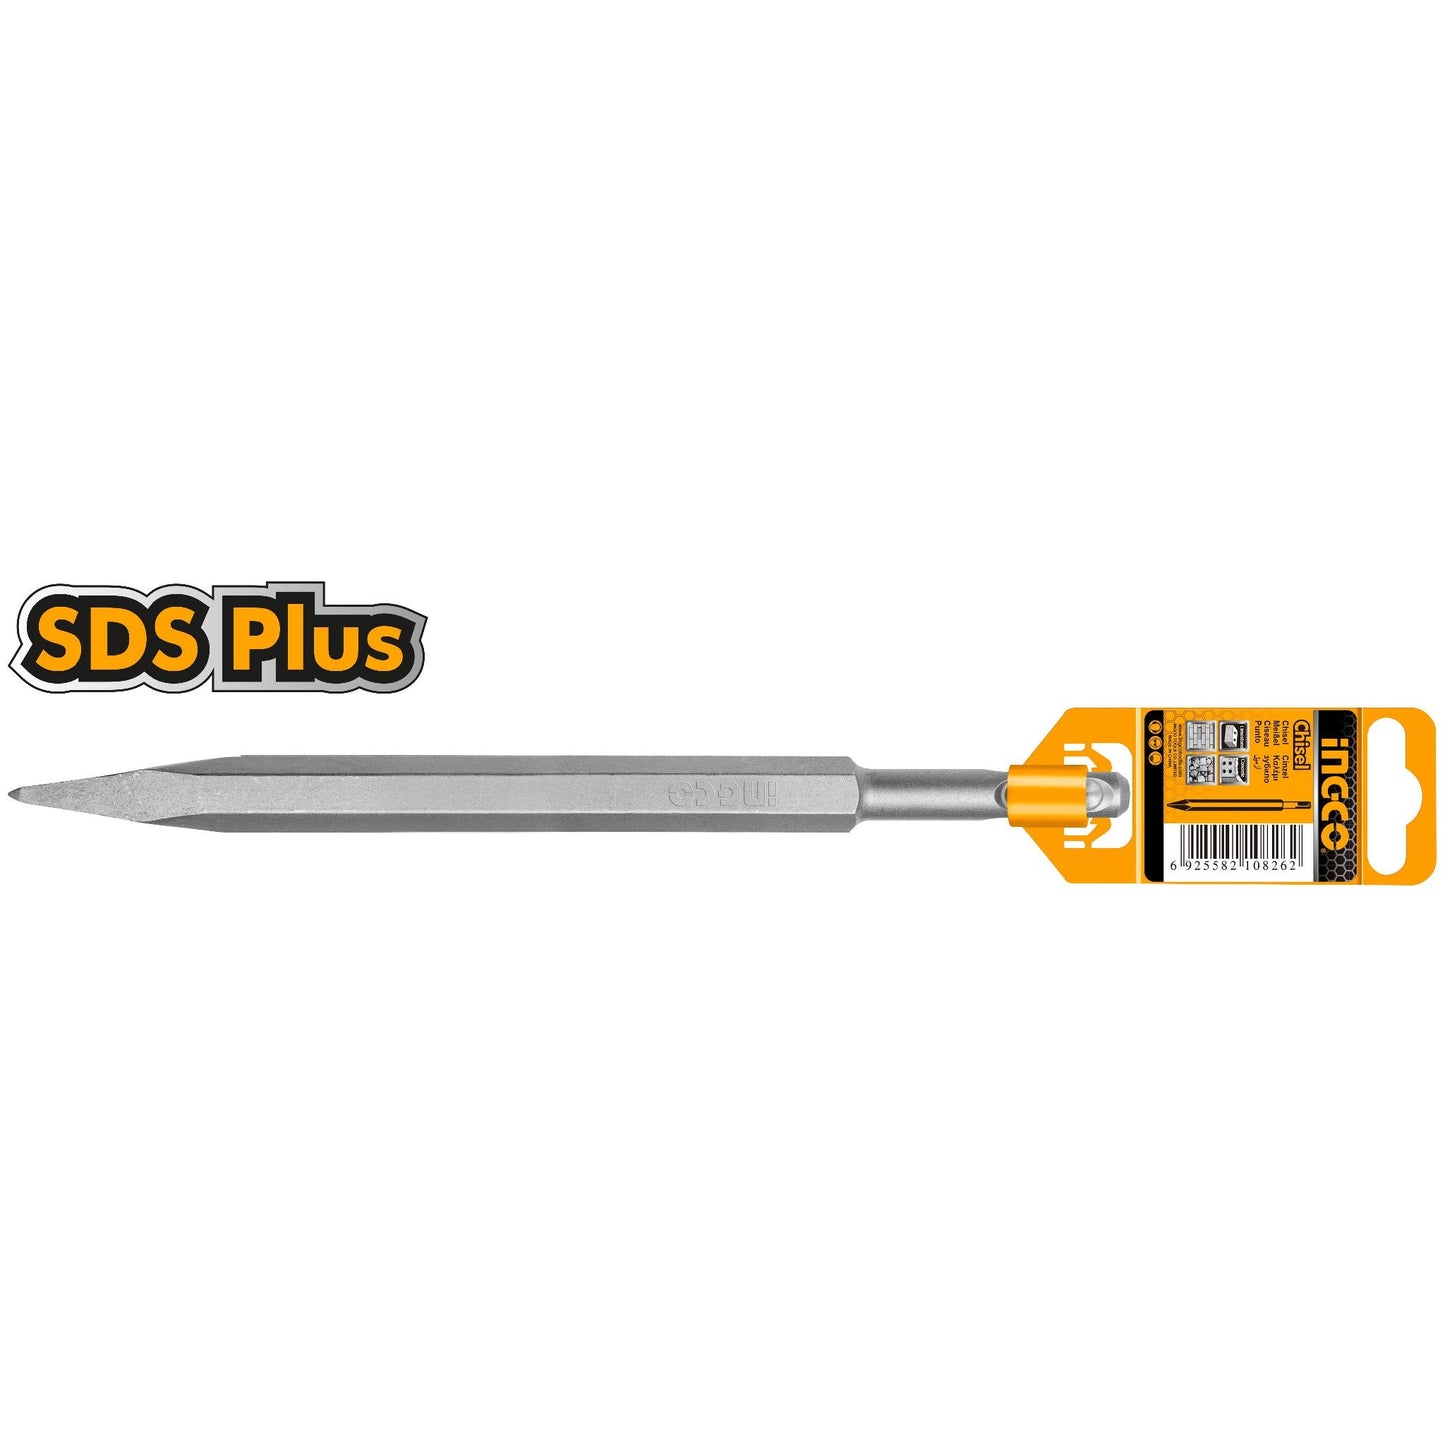 INGCO SDS PLUS Pointed Chisel 14x250mm for Concrete, Brickwork, and Sand Blasting Finishing (Sold per piece) | DBC0112501